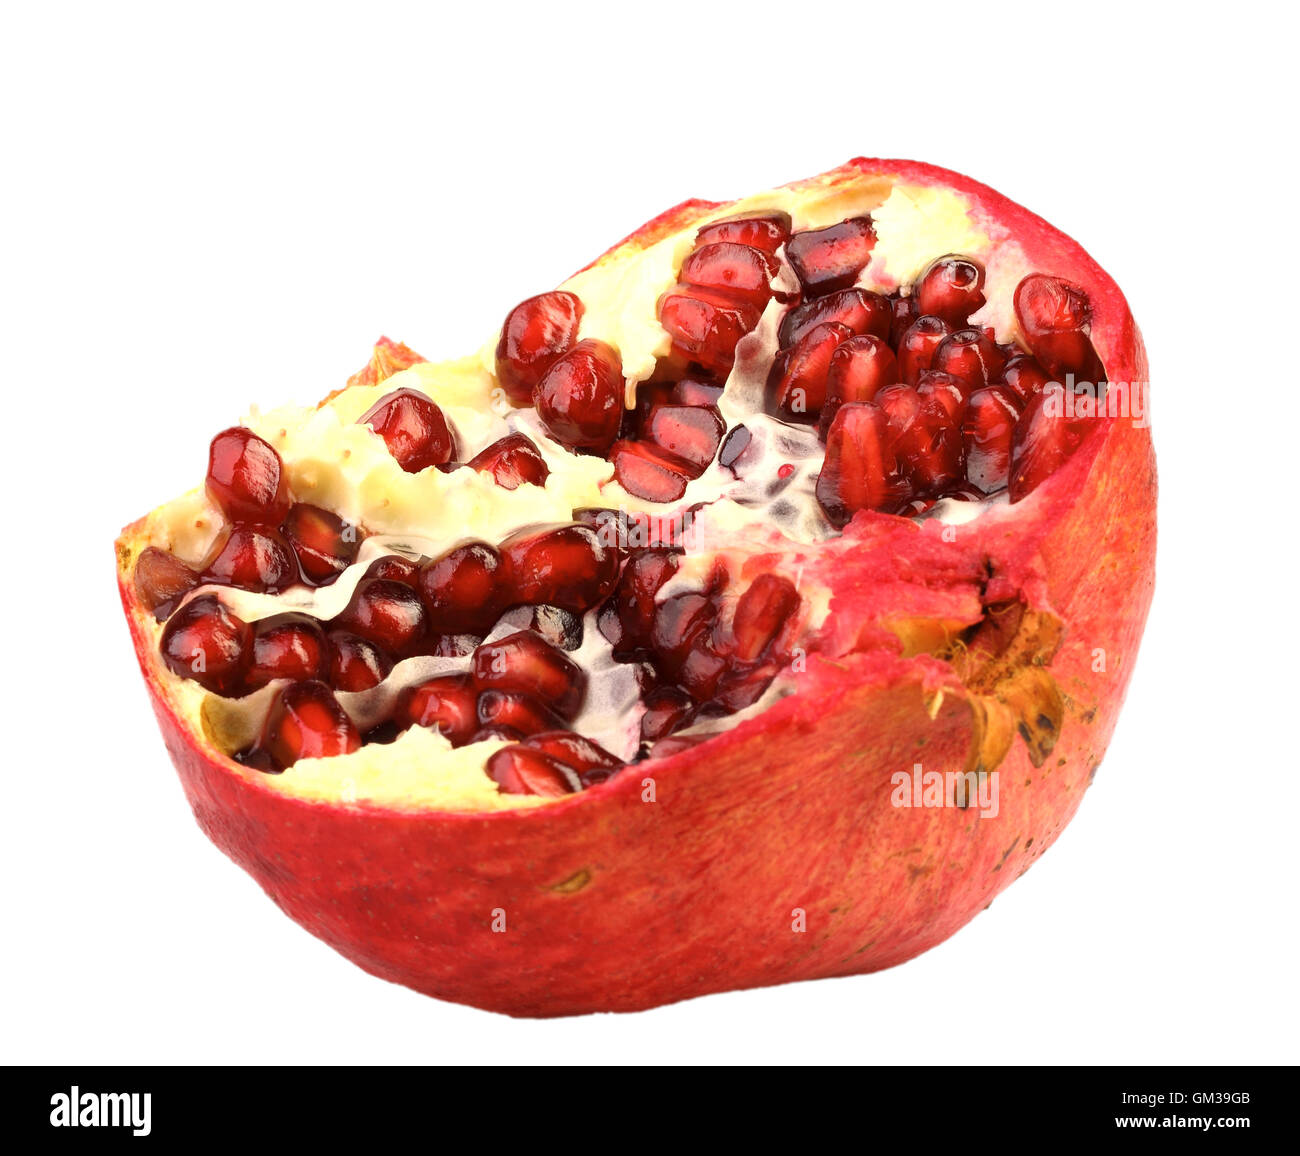 Part of fresh red pomegranate Stock Photo